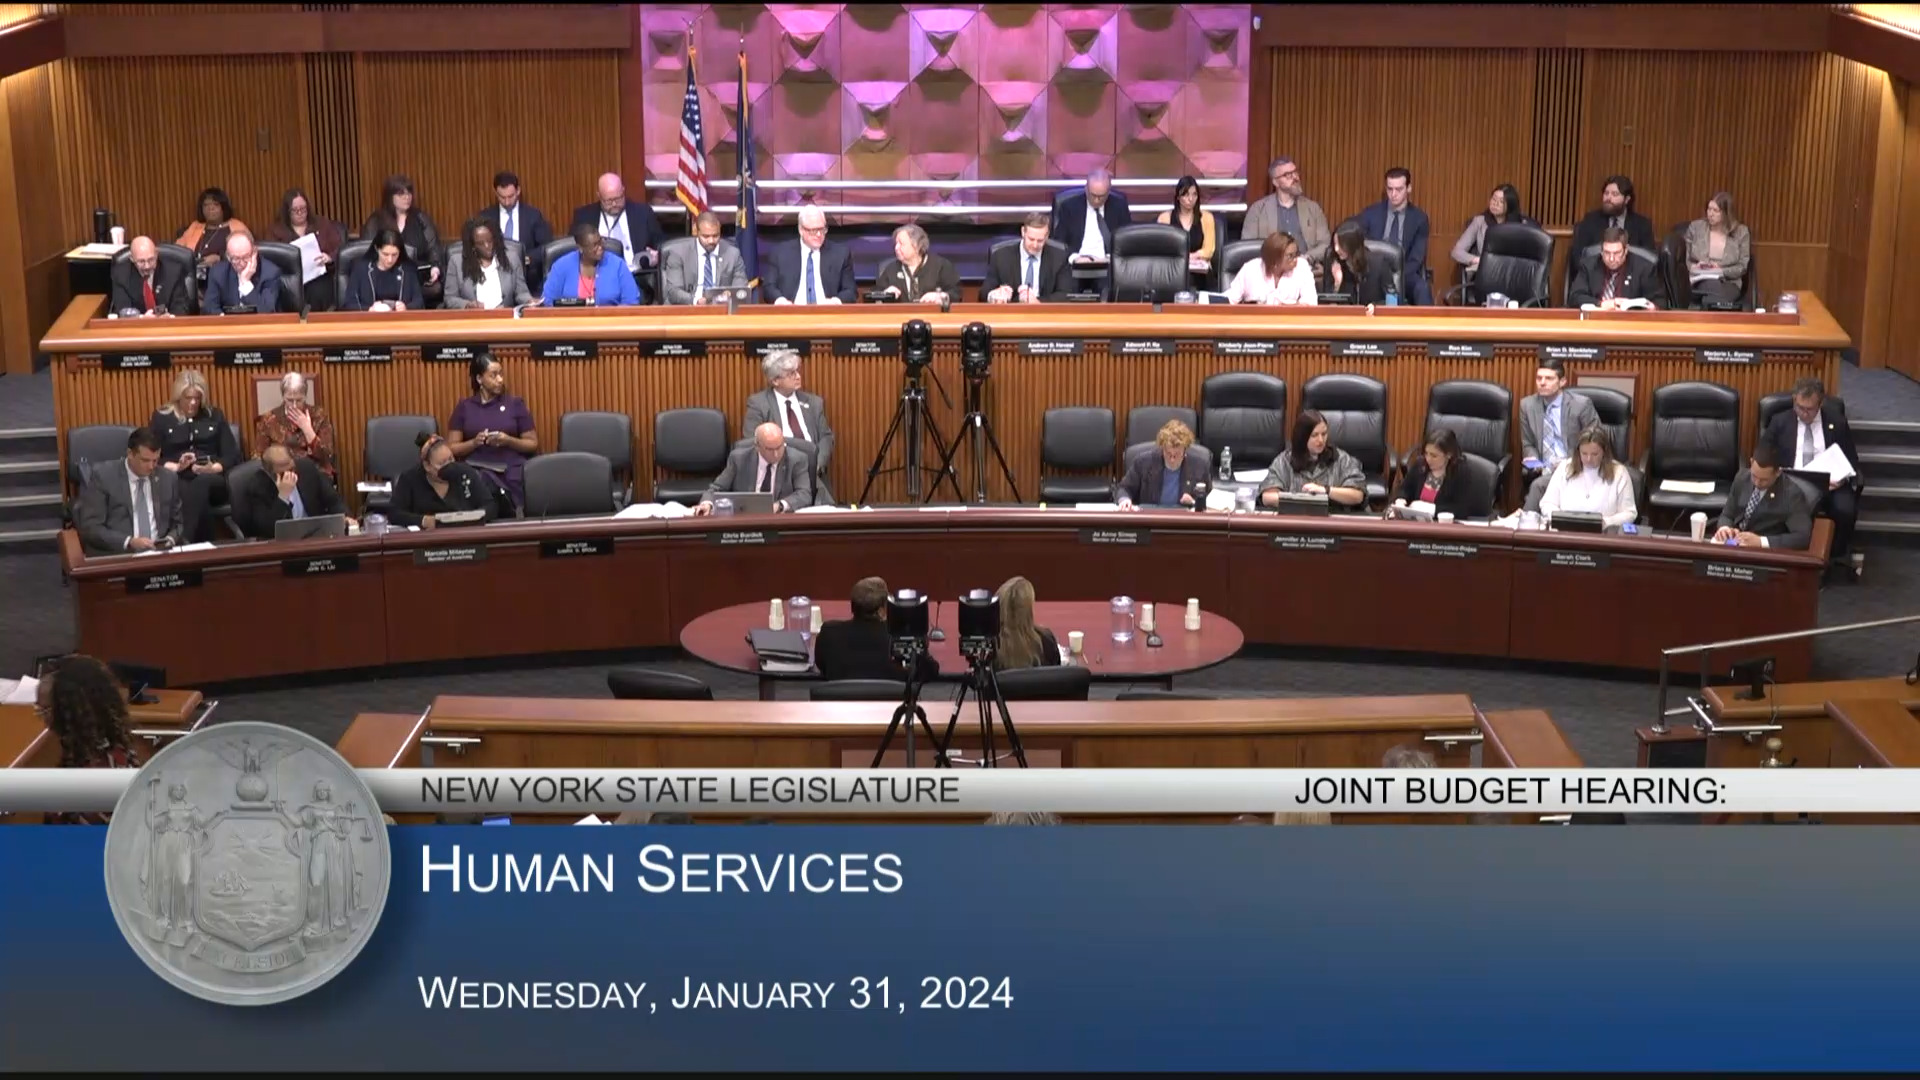 OTDA Commissioner Testifies During Budget Hearing on Human Services